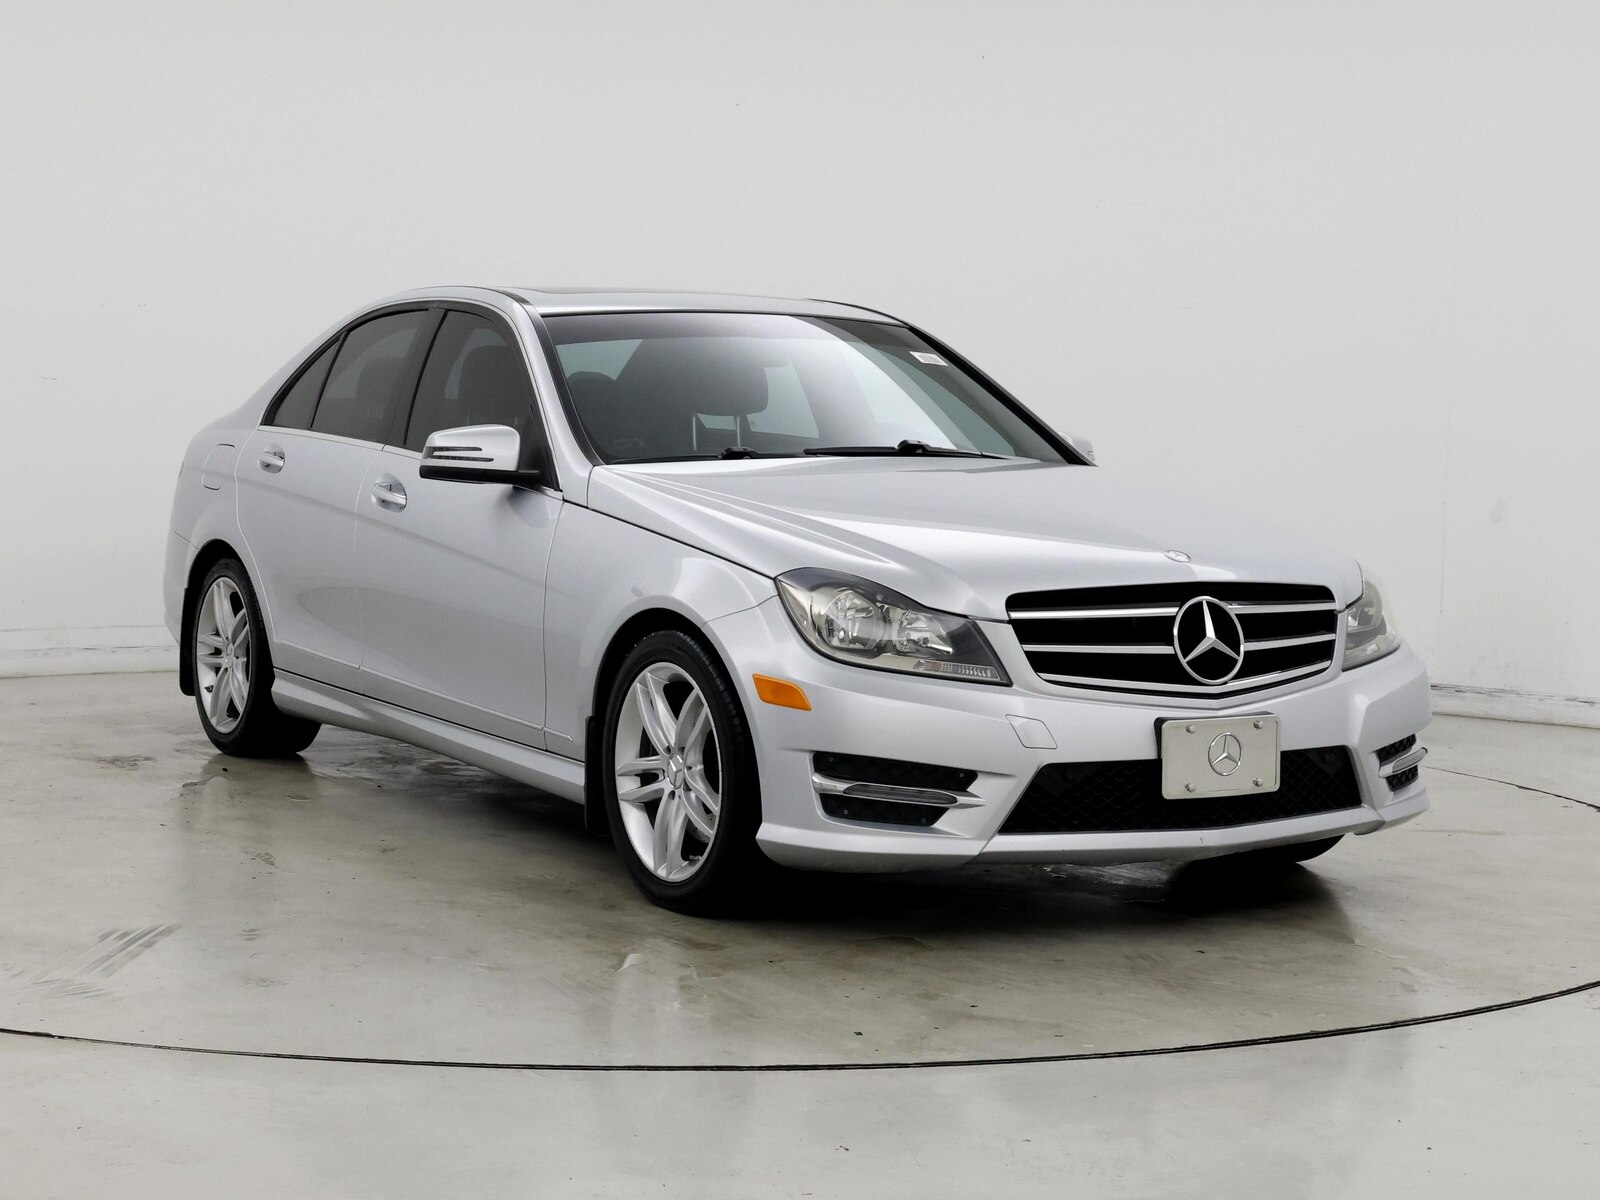 Used 2014 Mercedes-Benz C-Class C300 Sport with VIN WDDGF8AB5ER319401 for sale in Spokane Valley, WA